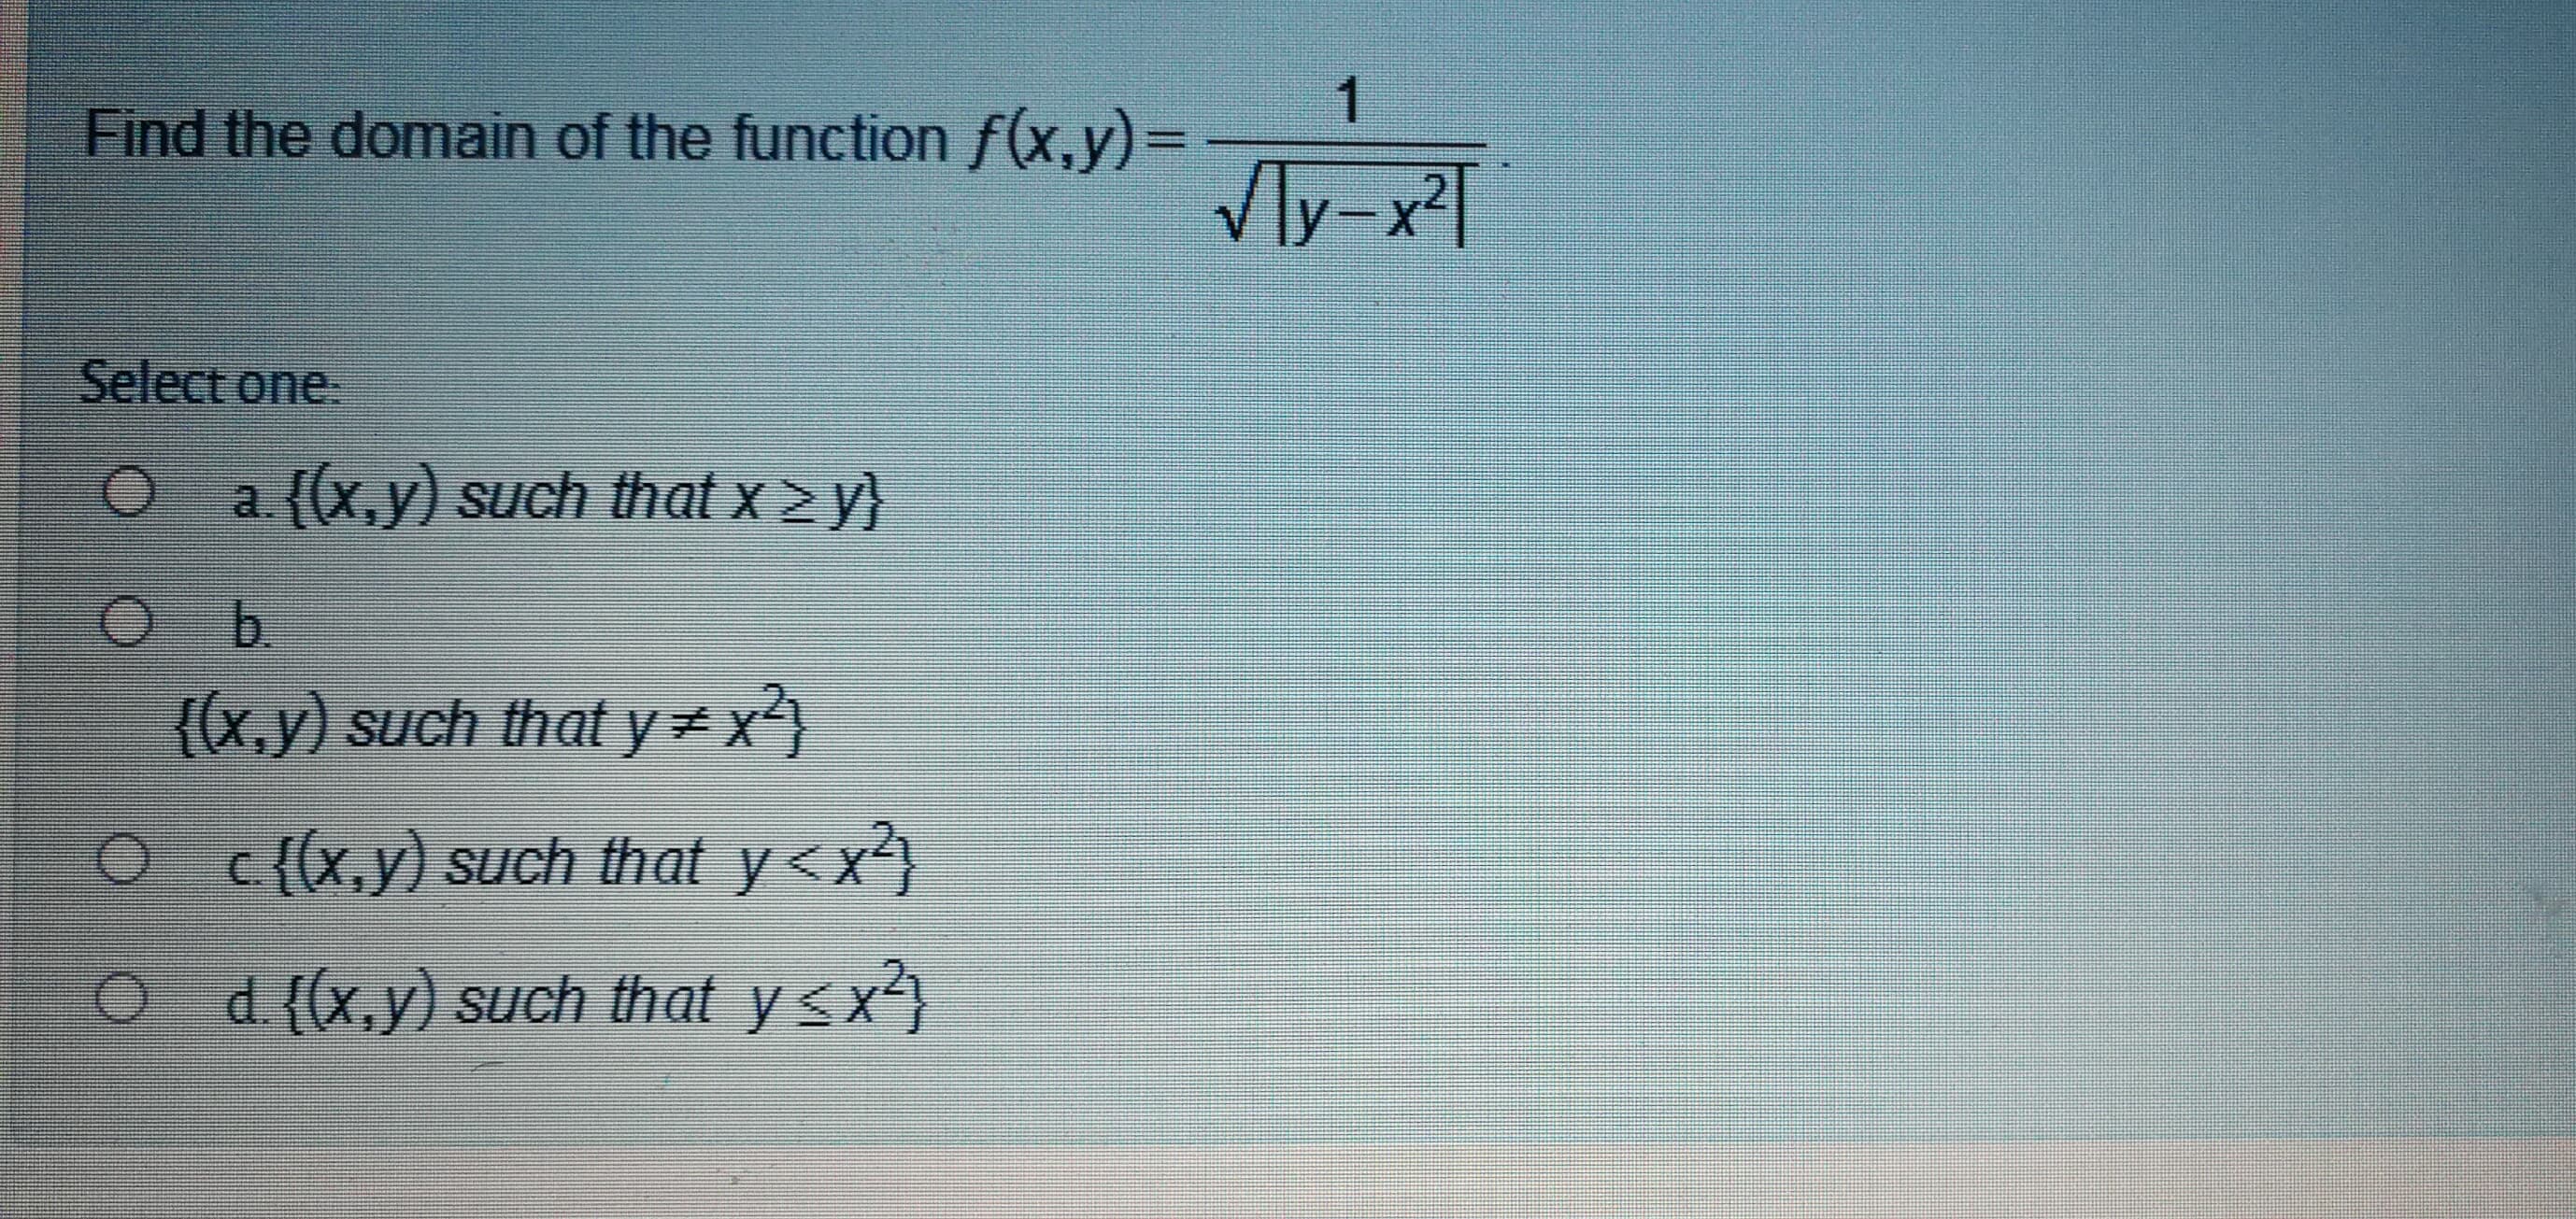 1
Find the domain of the function f(x,y)=D
VIy-x²T
Select one.
Oa{(x,y) such that x 2 y}
b.
{(x,y) such that y= x2
O c{x,y) such that y<x?}
O d{(x,y) such that y sx3
